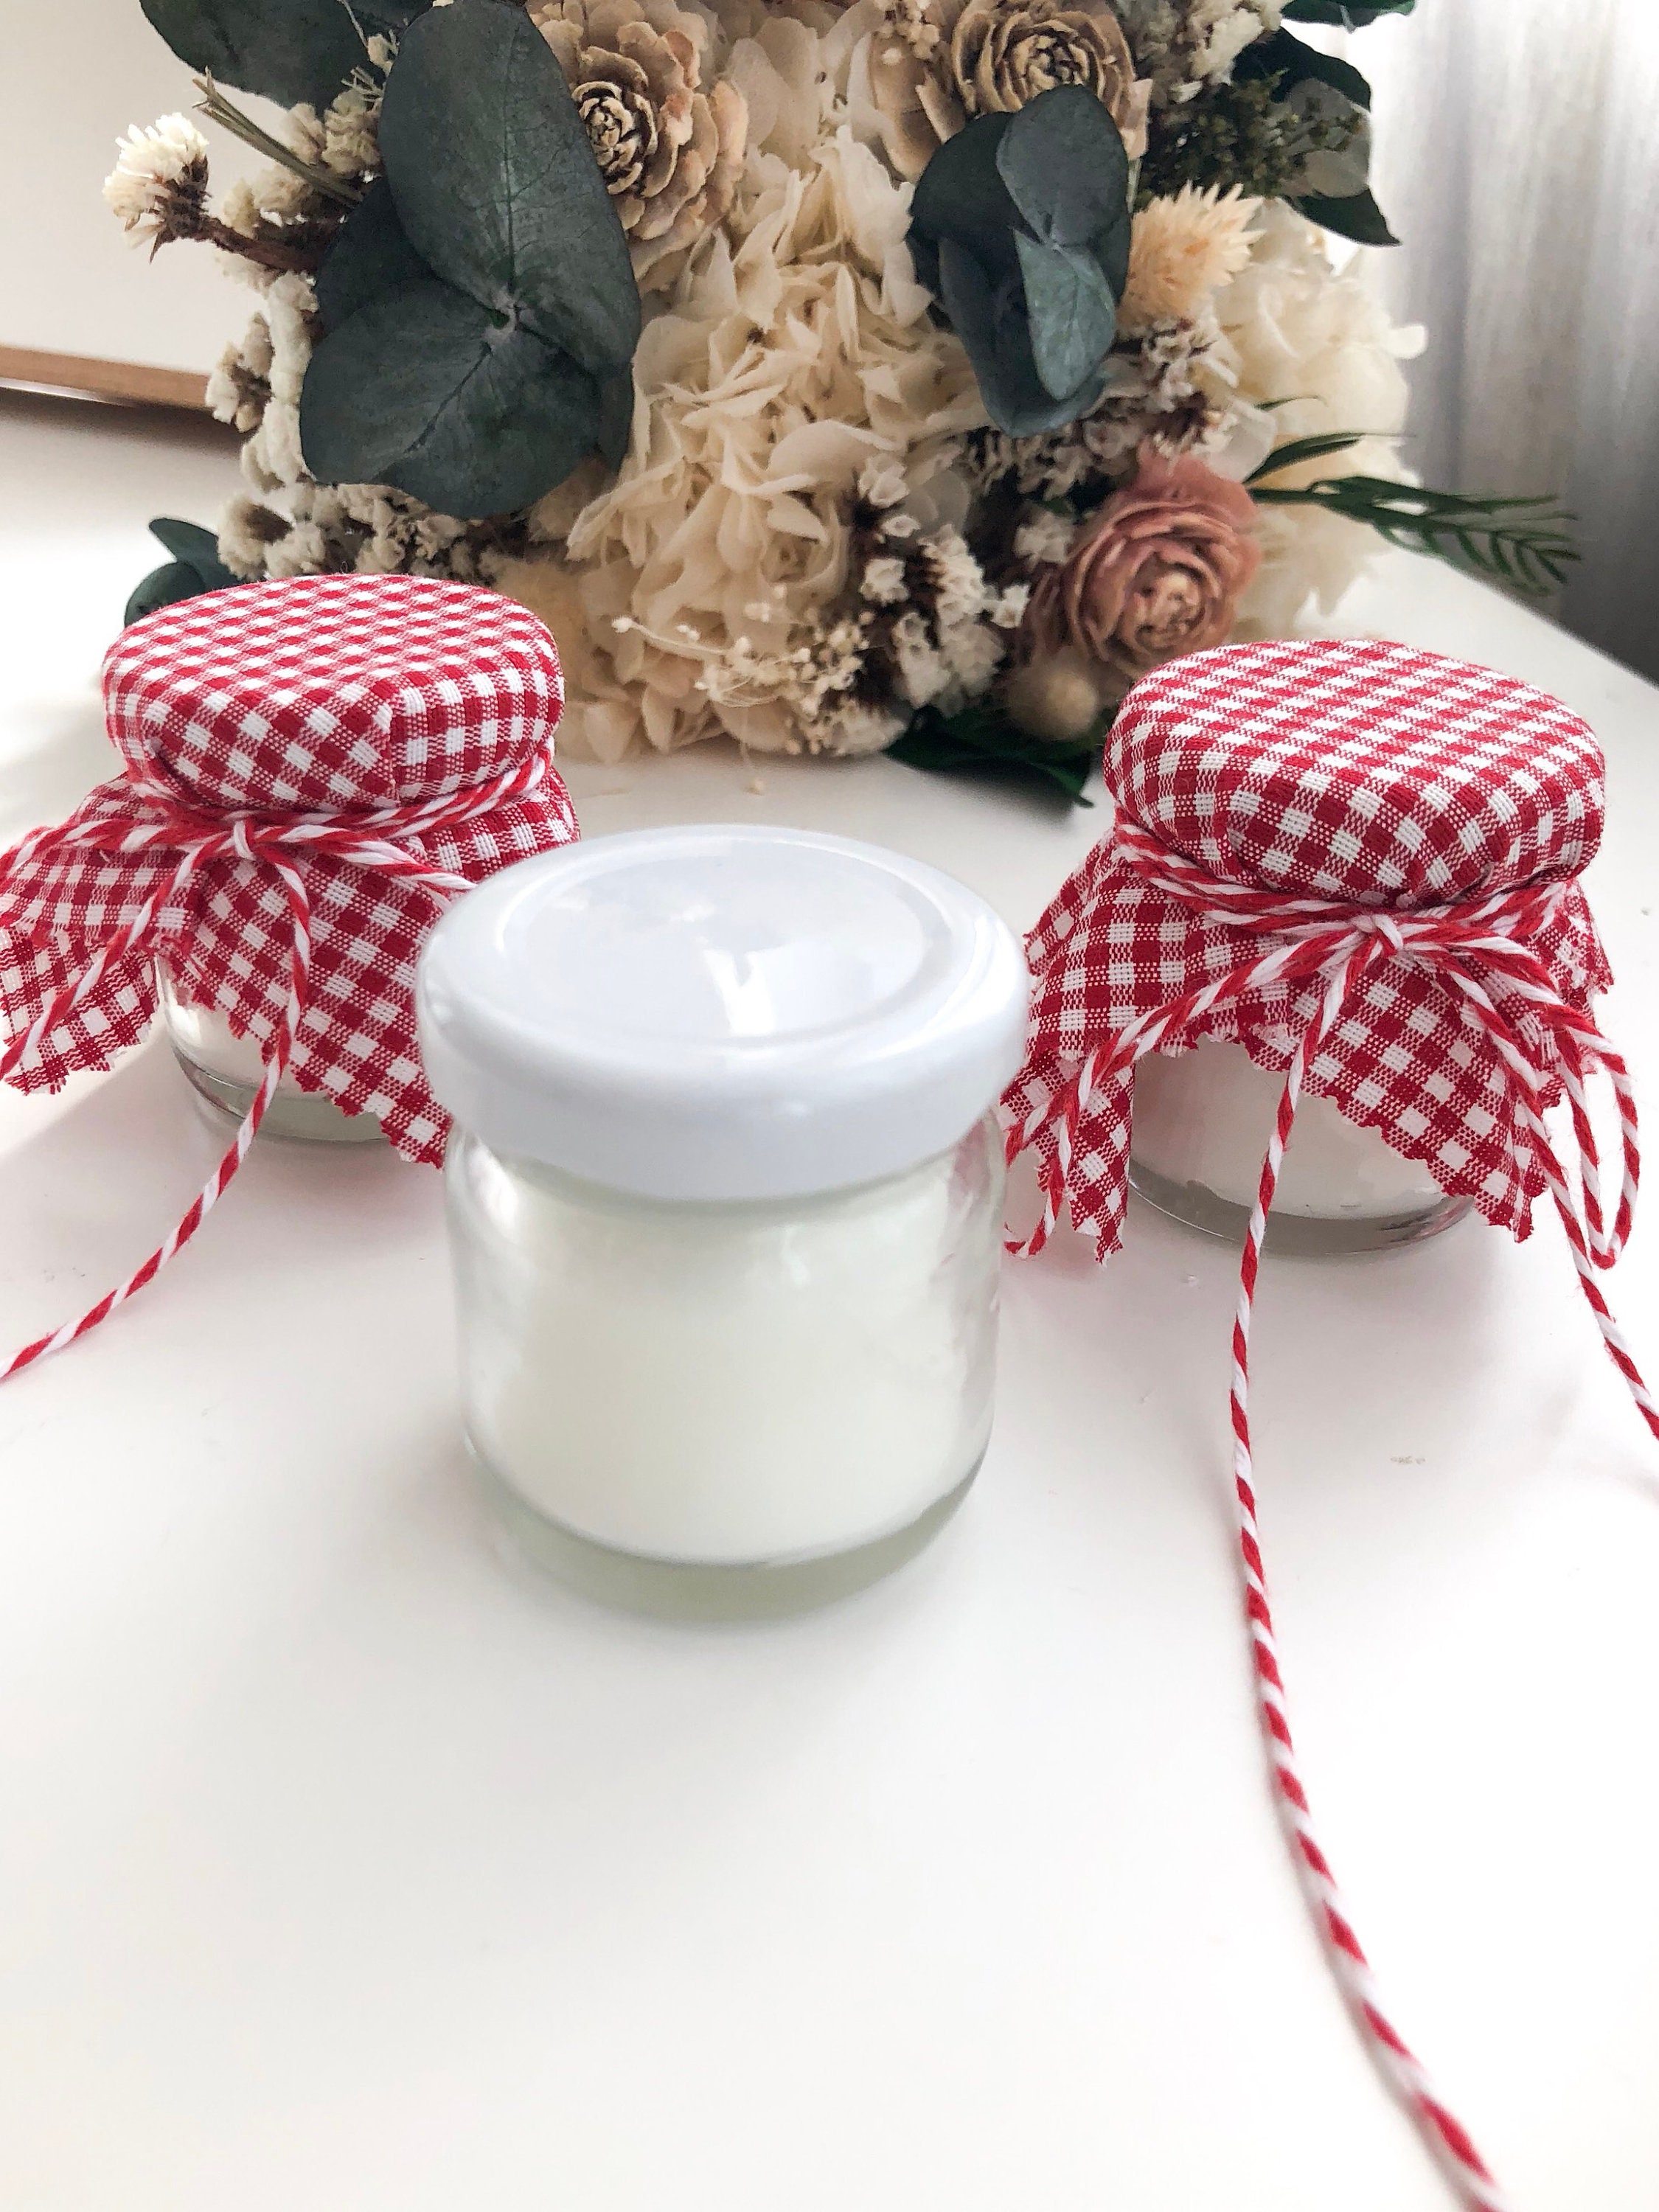 Candle Wedding Favors, Mini Jars, Unique Candle Jar, Gift for